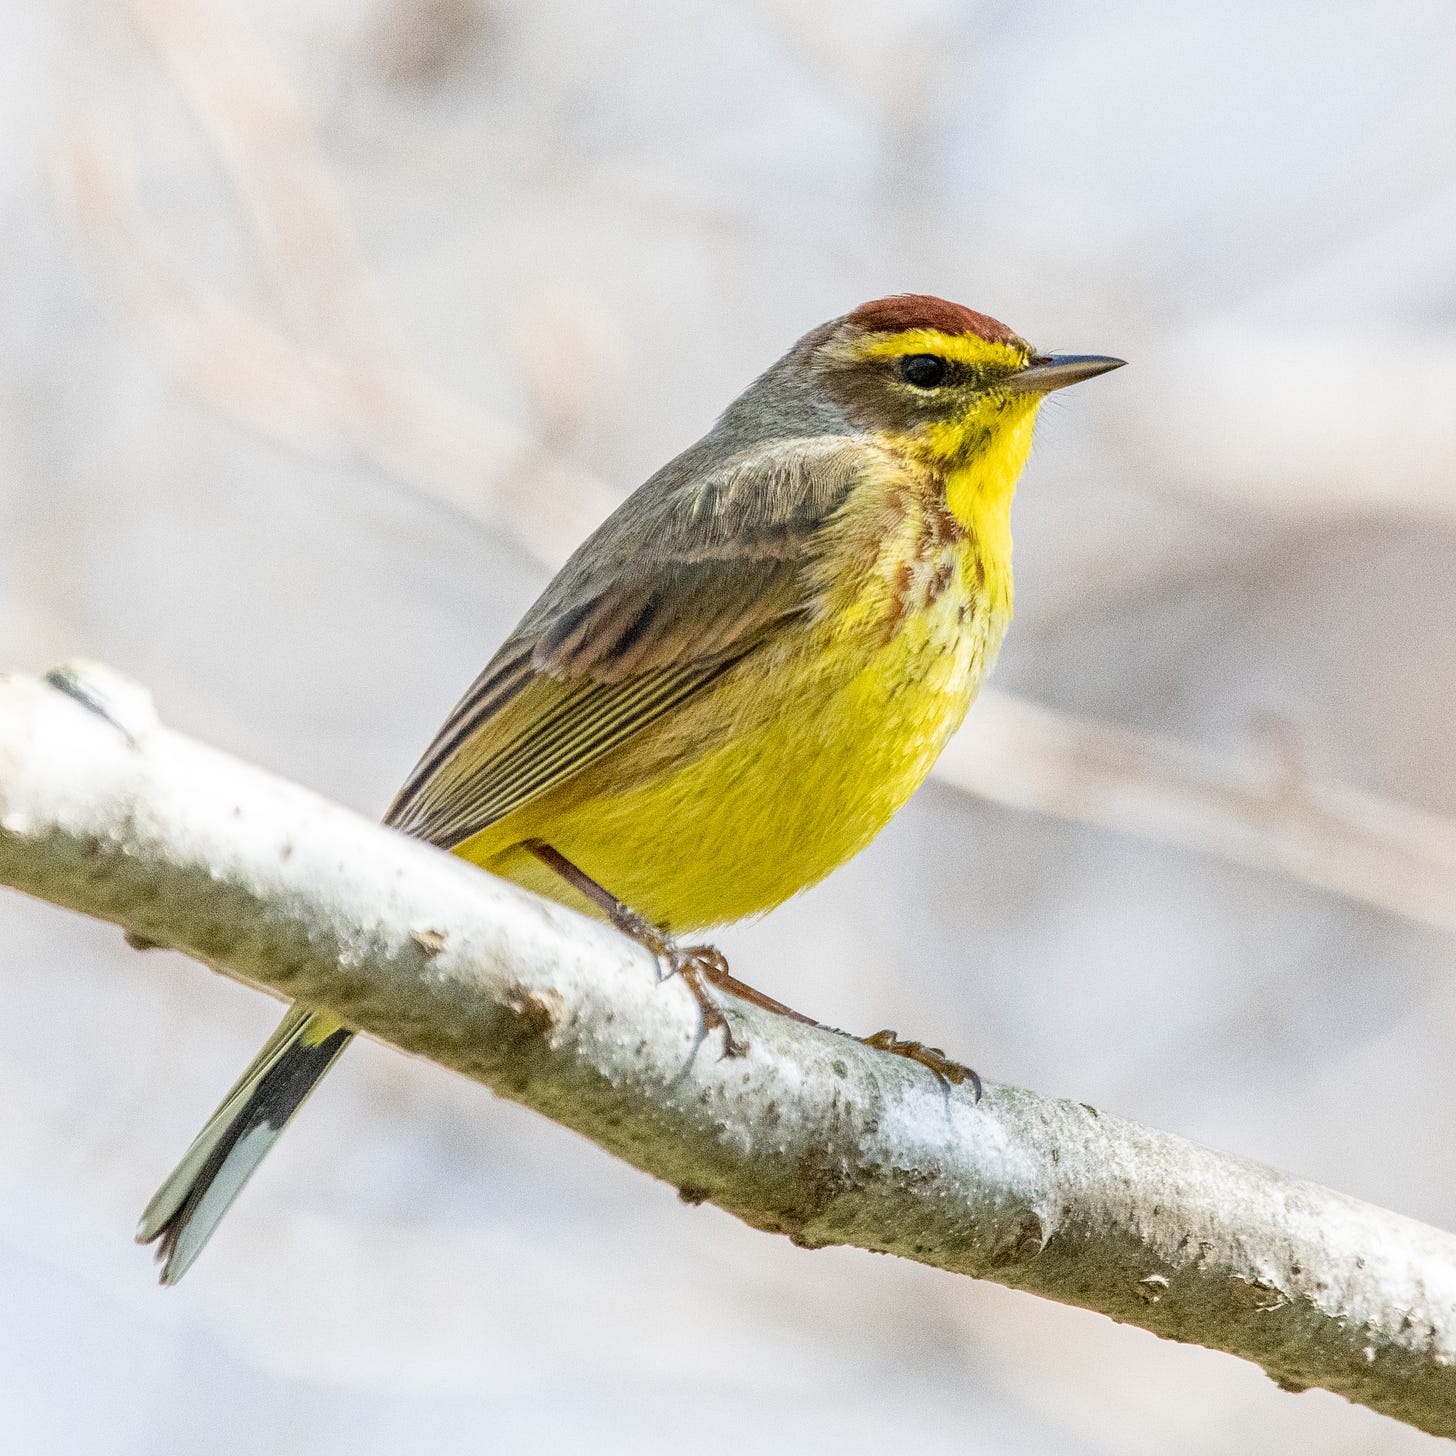 A palm warbler in a statuesque pose